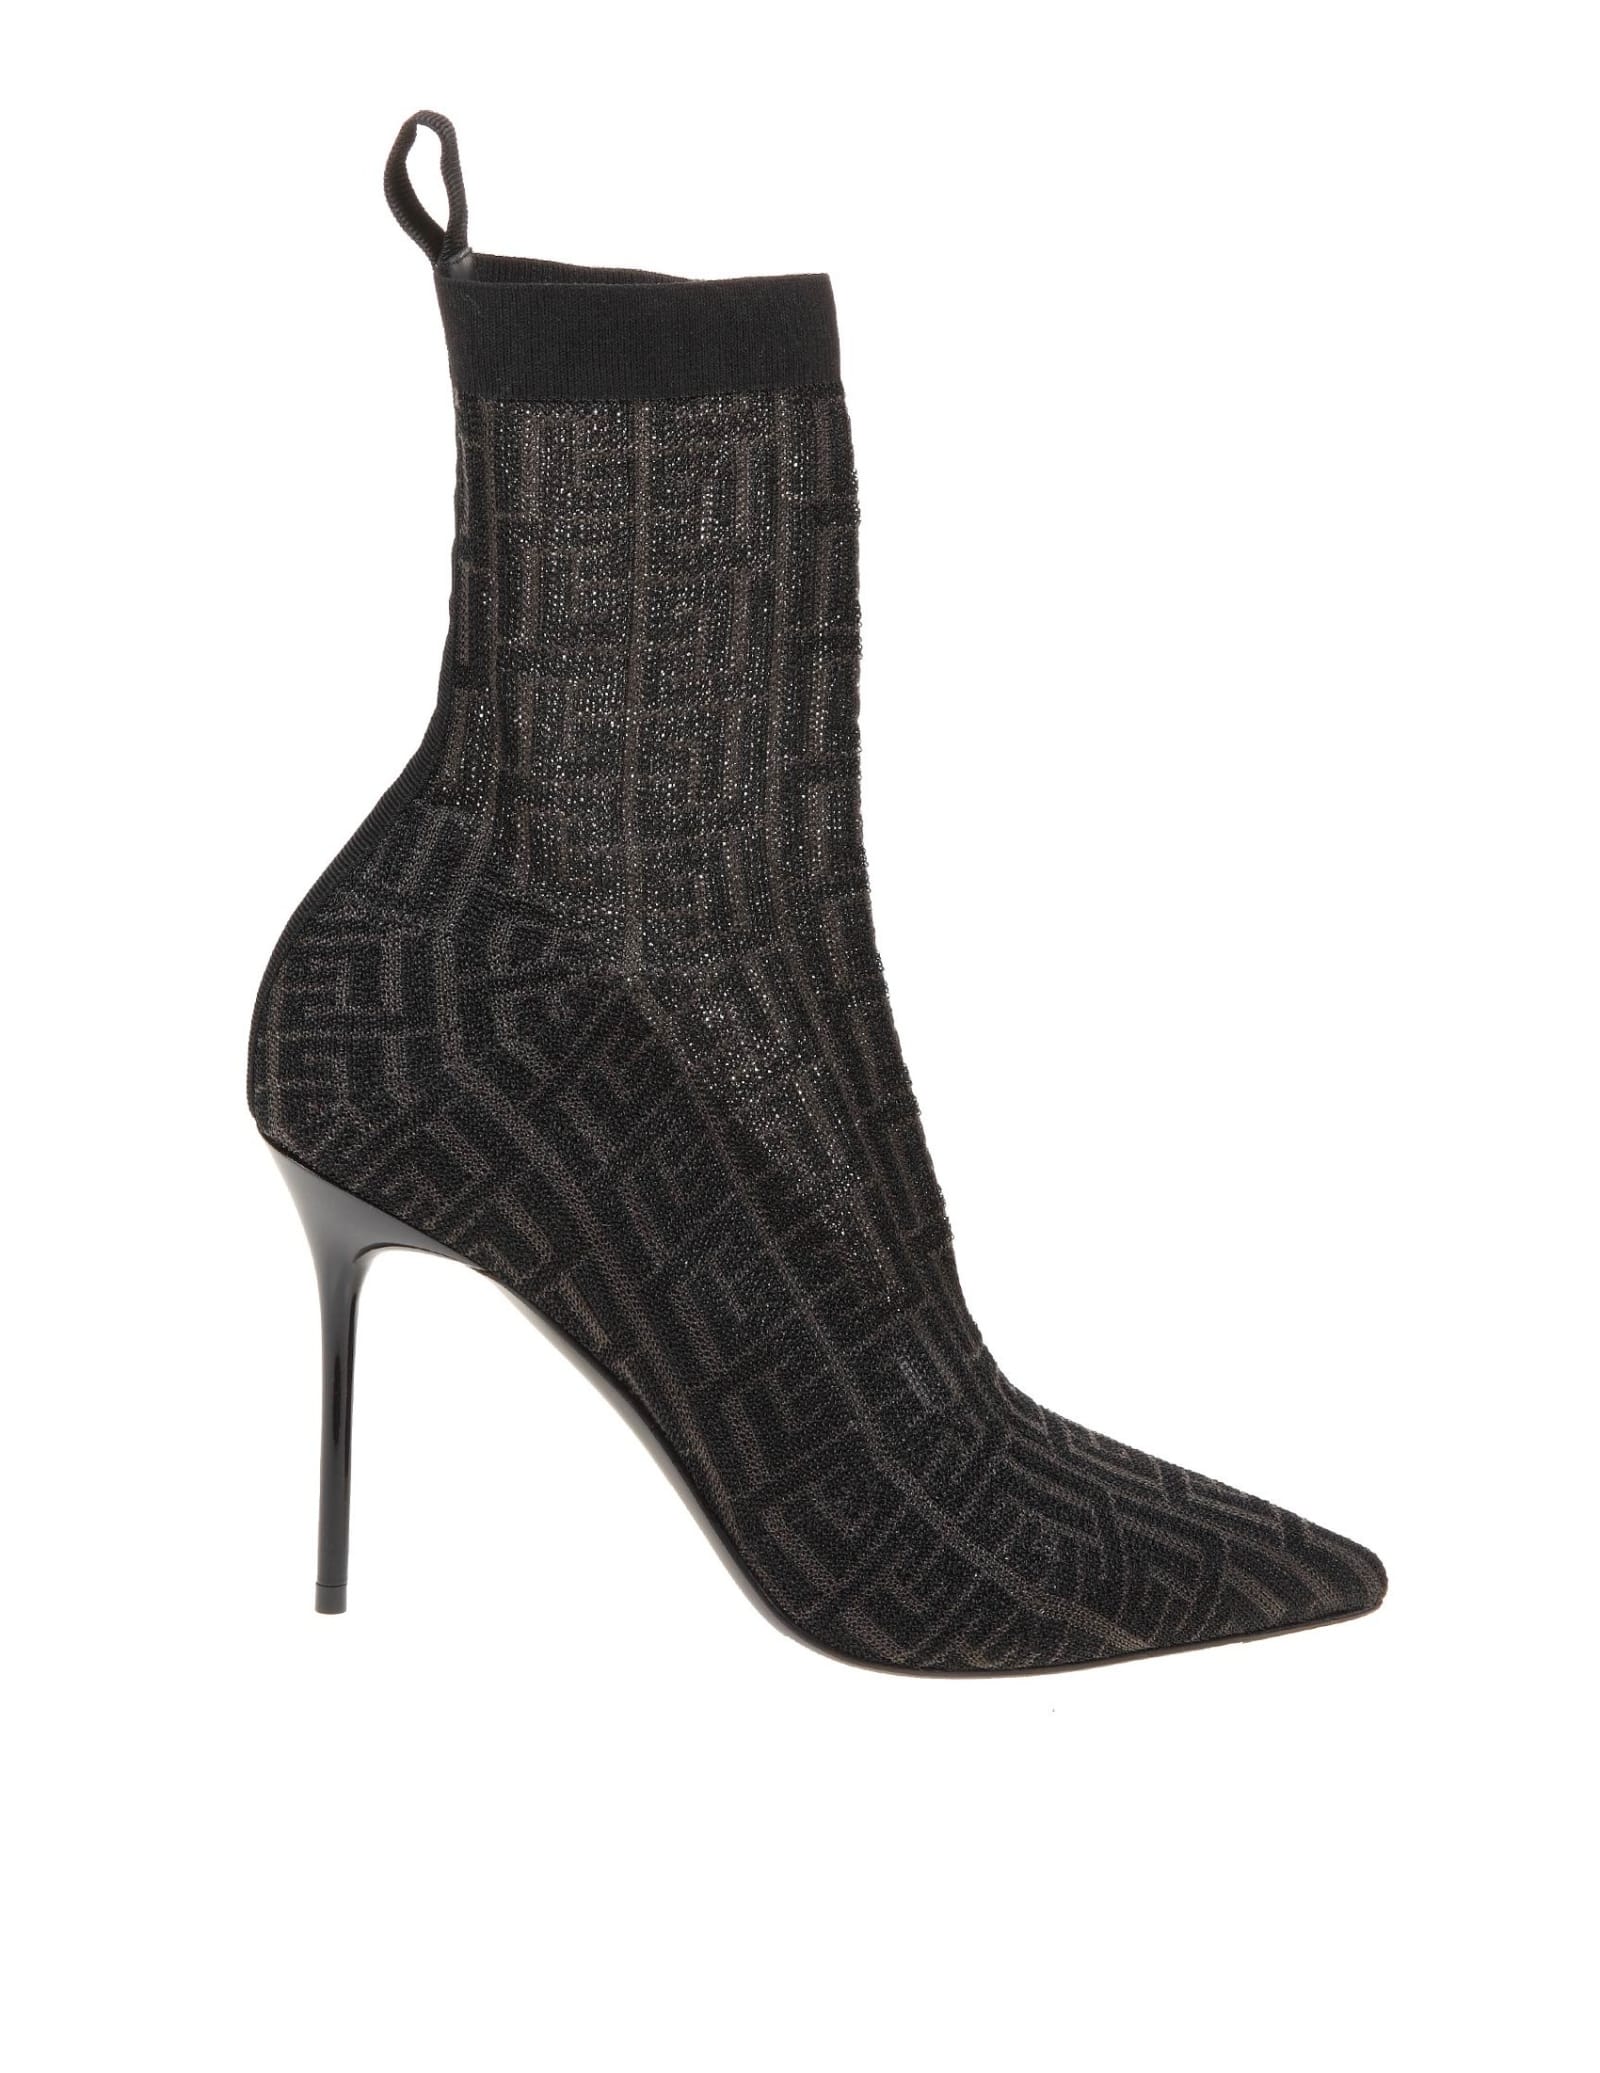 Buy Balmain Ankle Boot In Stretch Fabric With Monogram online, shop Balmain shoes with free shipping